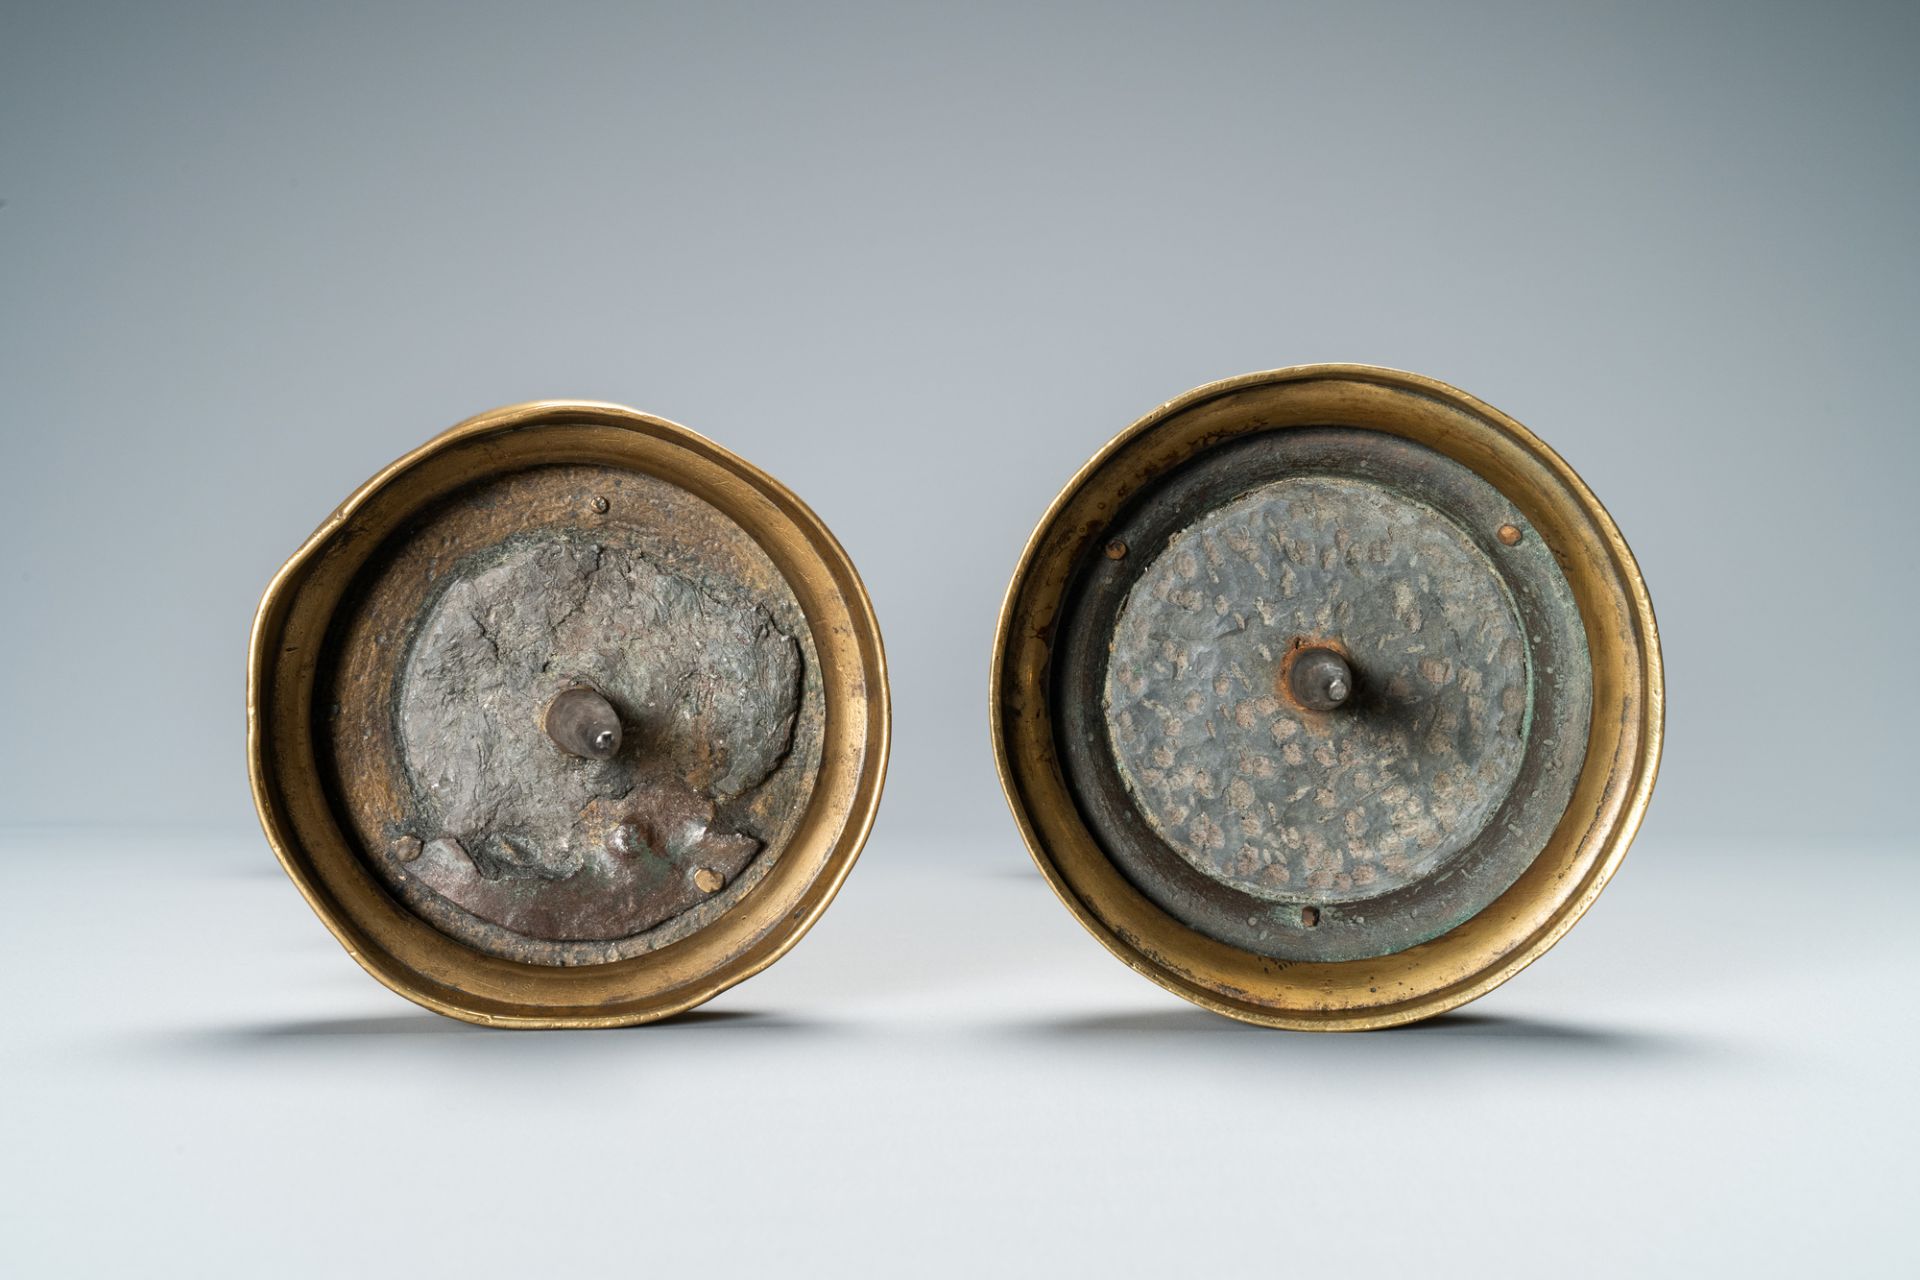 A composite pair of brass alloy candlesticks, Germany, 16th C. - Image 6 of 7